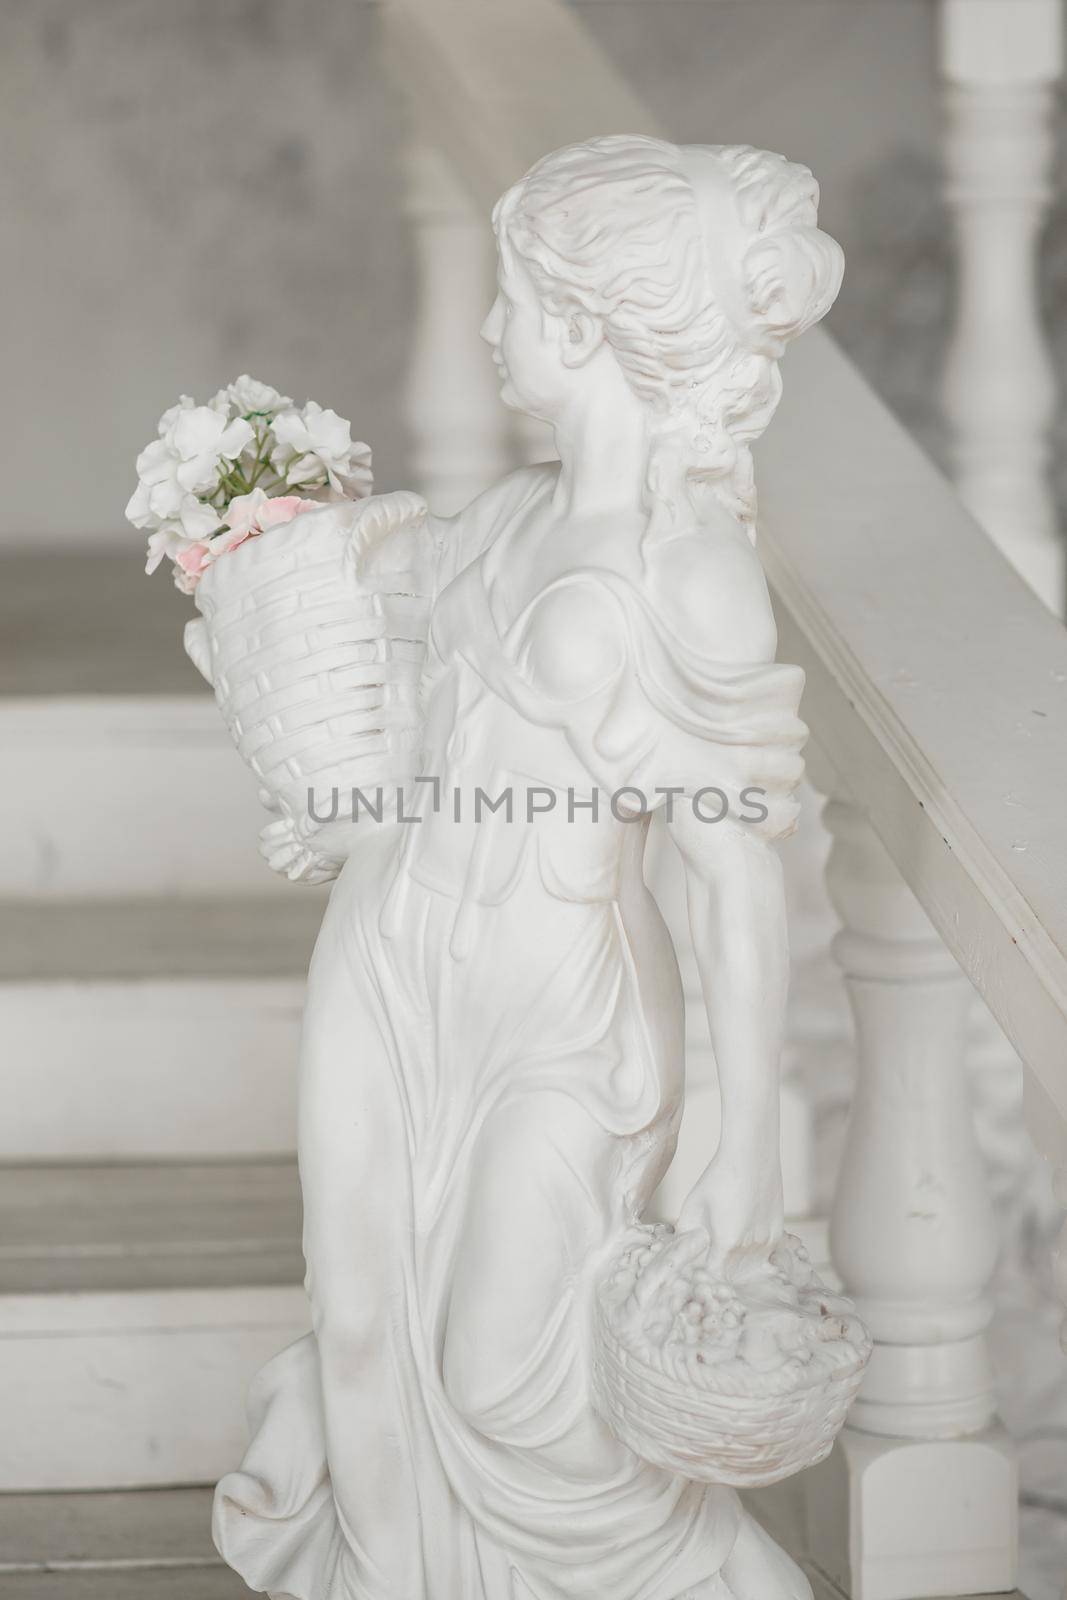 Sculpture of a girl with a basket of flowers standing by the stairs.